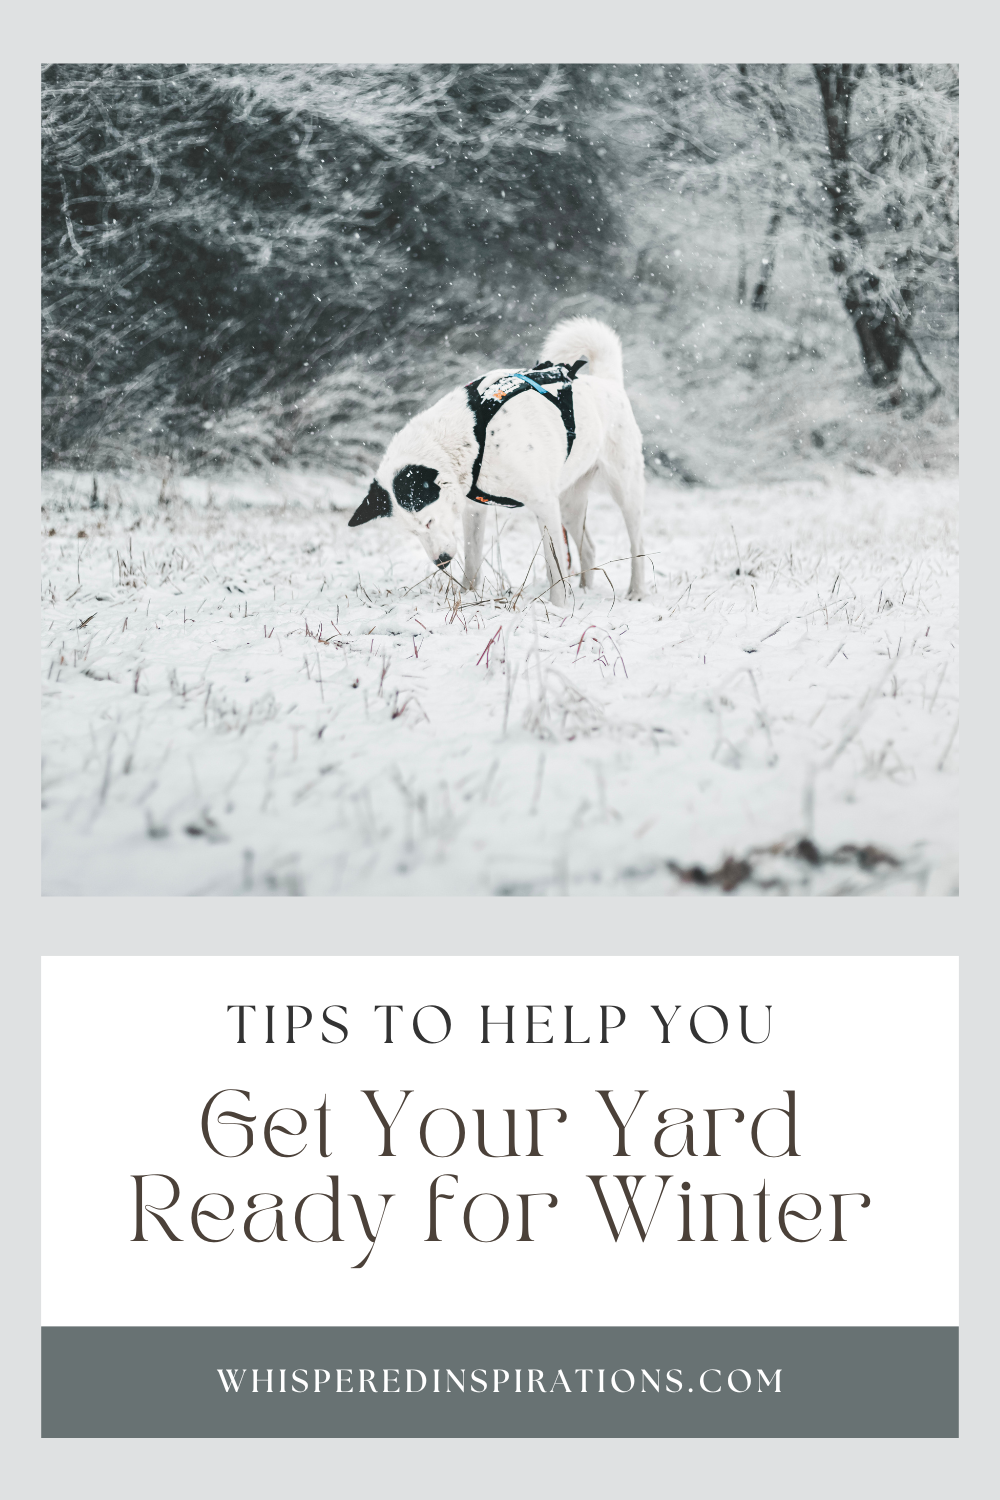 There is a dusting of snow on a yard and a dog is seen sniffing the ground. This article covers essentials to getting your yard ready for winter.